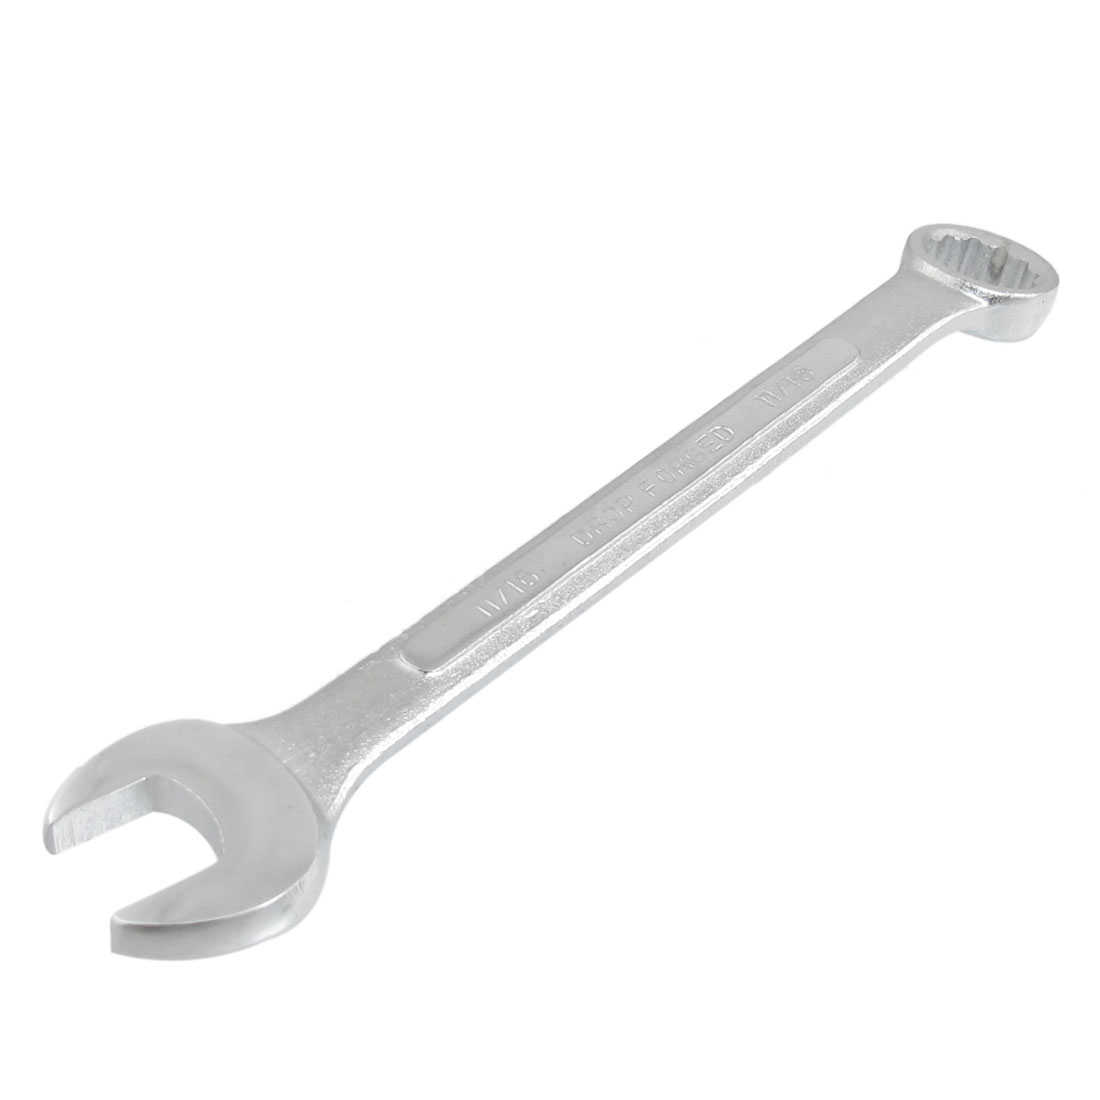 Unique Bargains 20cm Double Handy Tool Ended 18mm Flare Nut Socket Open End Combination Wrench